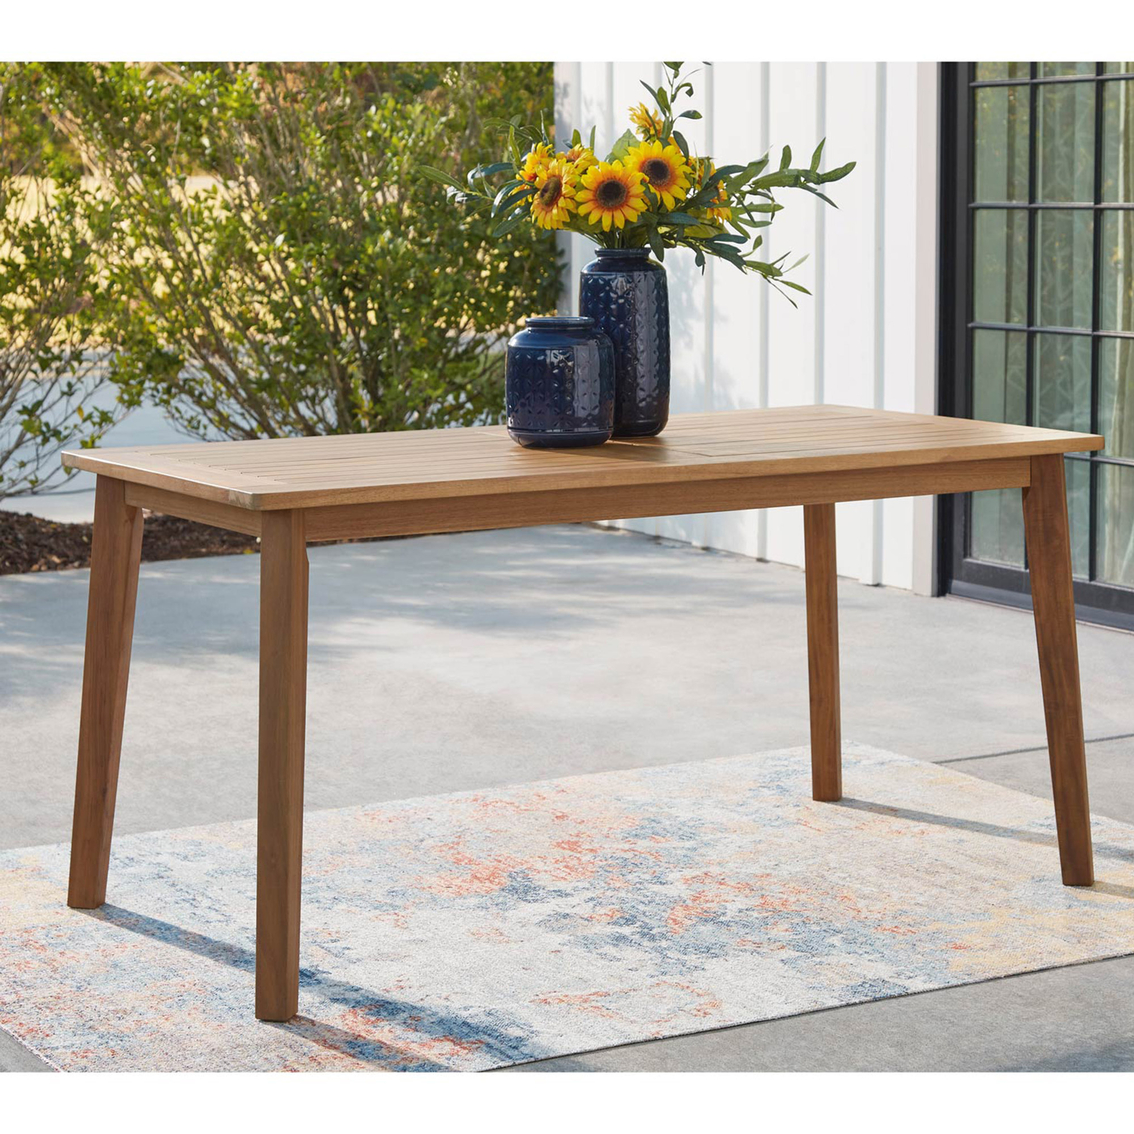 Signature Design by Ashley Janiyah Outdoor Rectangular Dining Table - Image 4 of 6